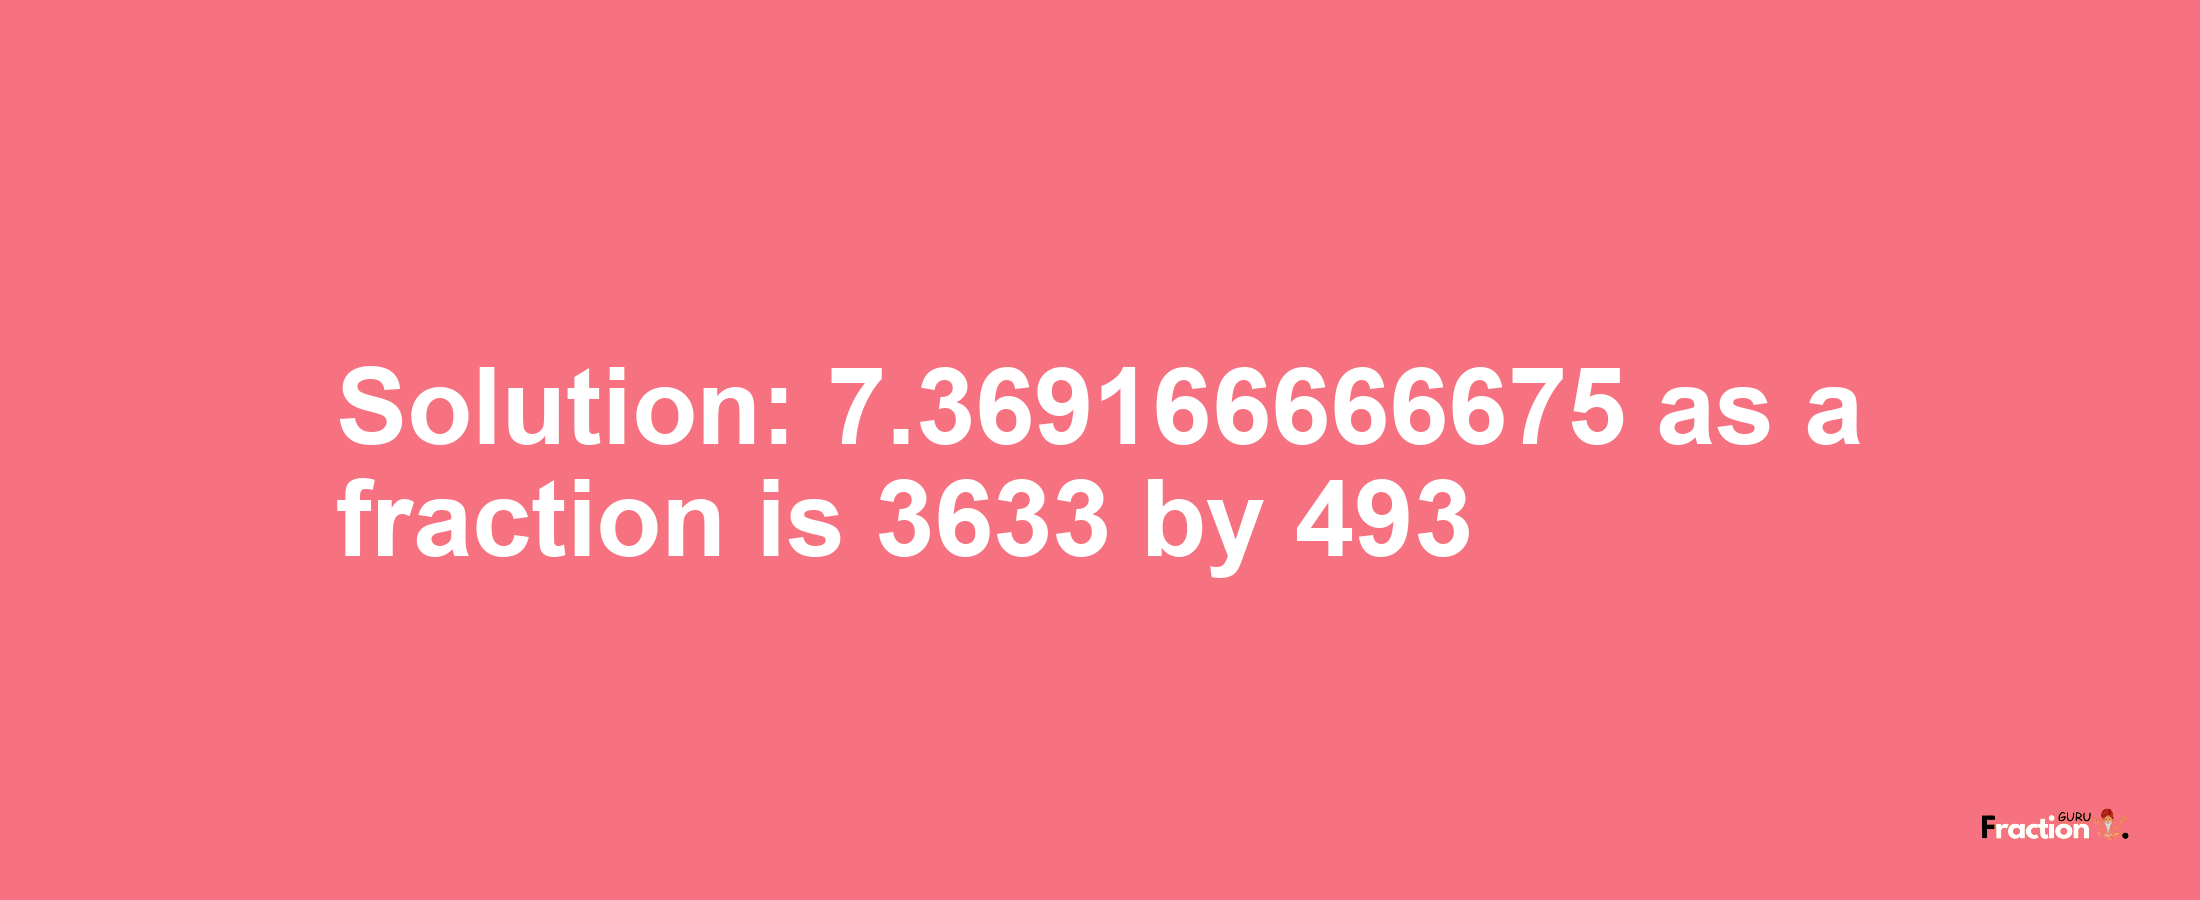 Solution:7.369166666675 as a fraction is 3633/493